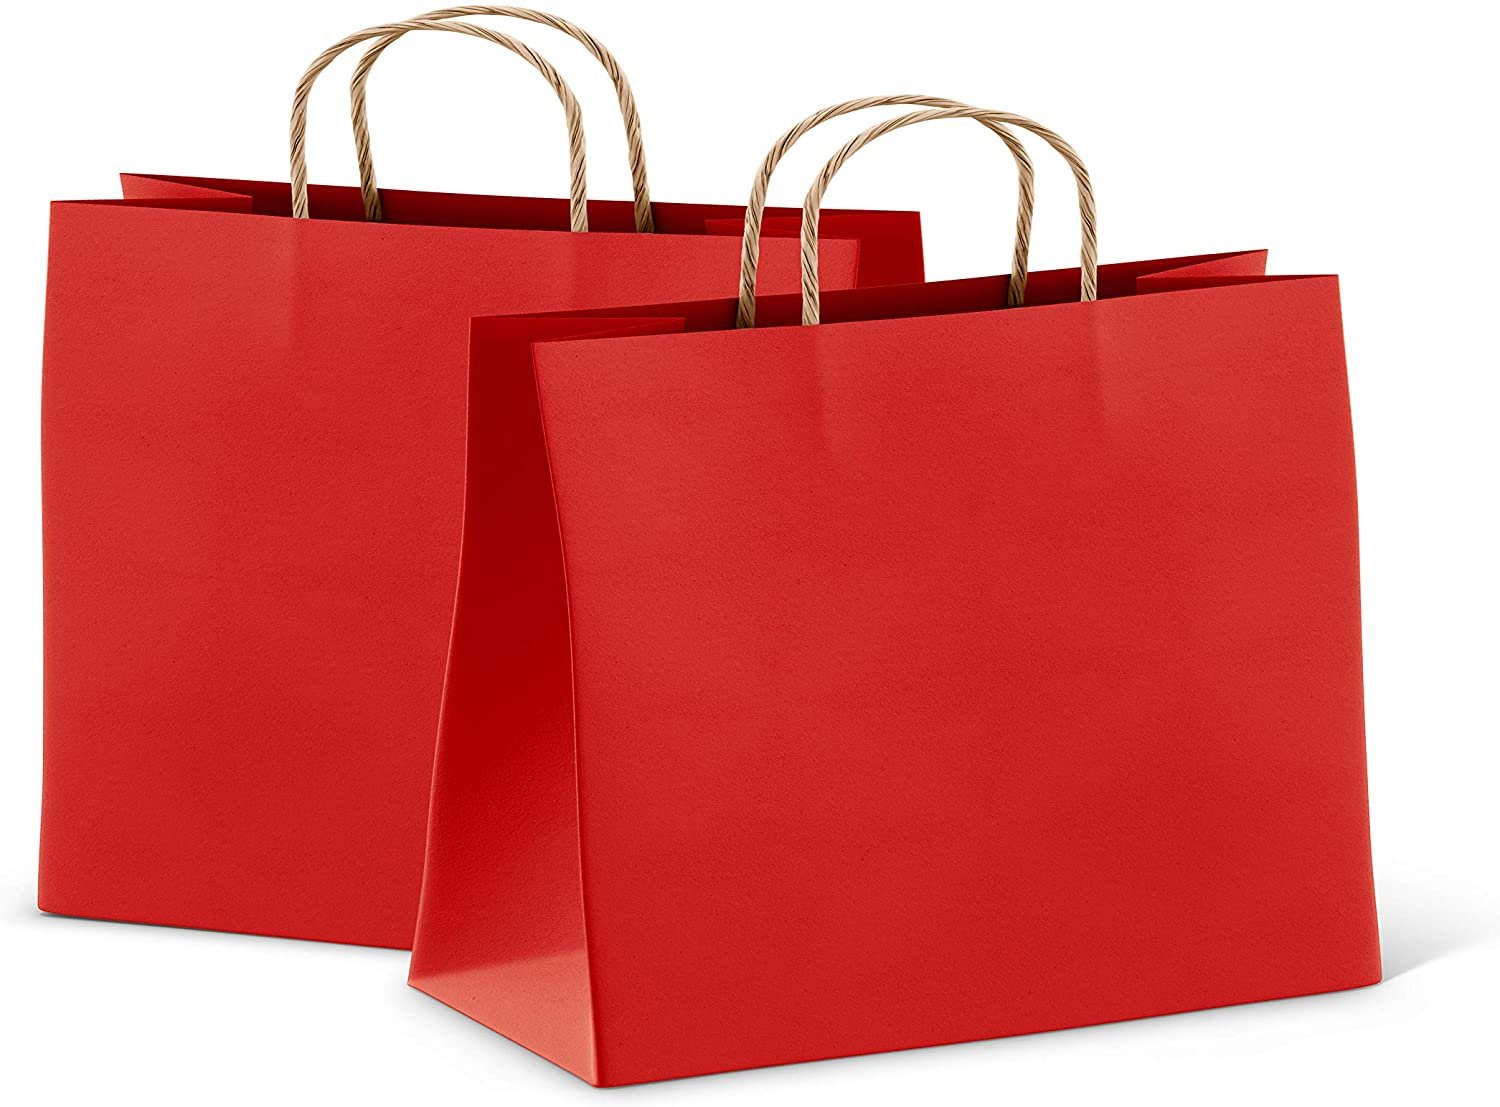 Download Red Retail Shopping Kraft Gift Paper Bags With Handles 16x6x12 Pack of 25 | eBay